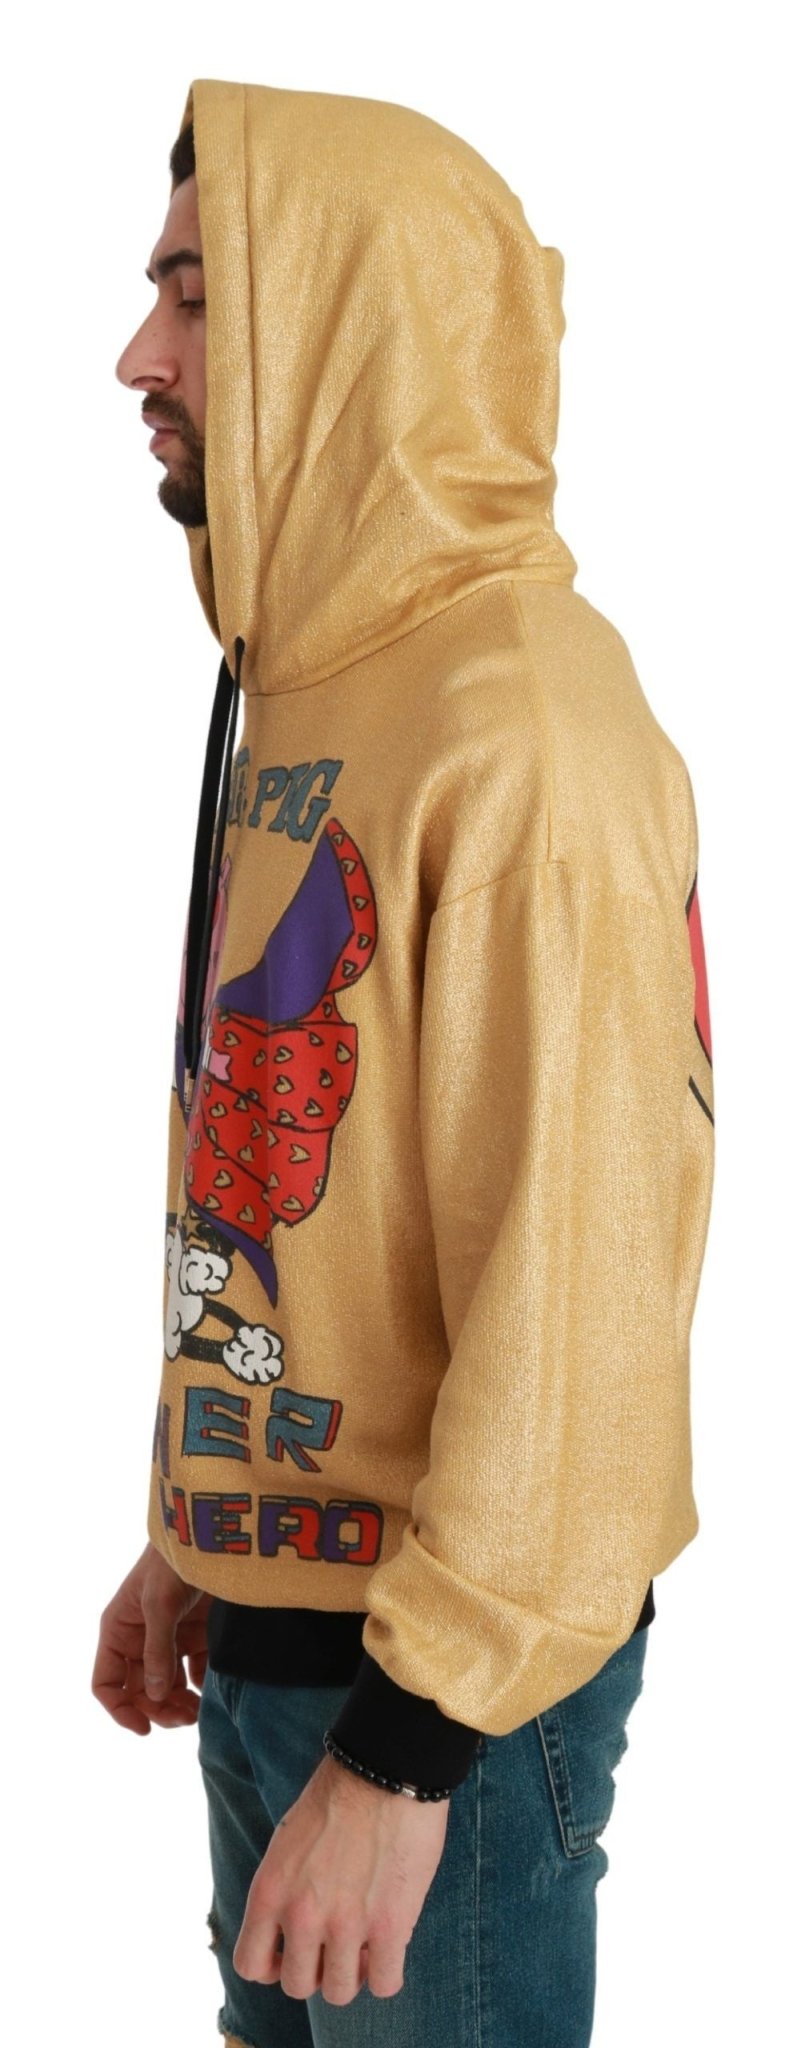 Dolce & Gabbana Exquisite Gold Hooded Cotton Sweater